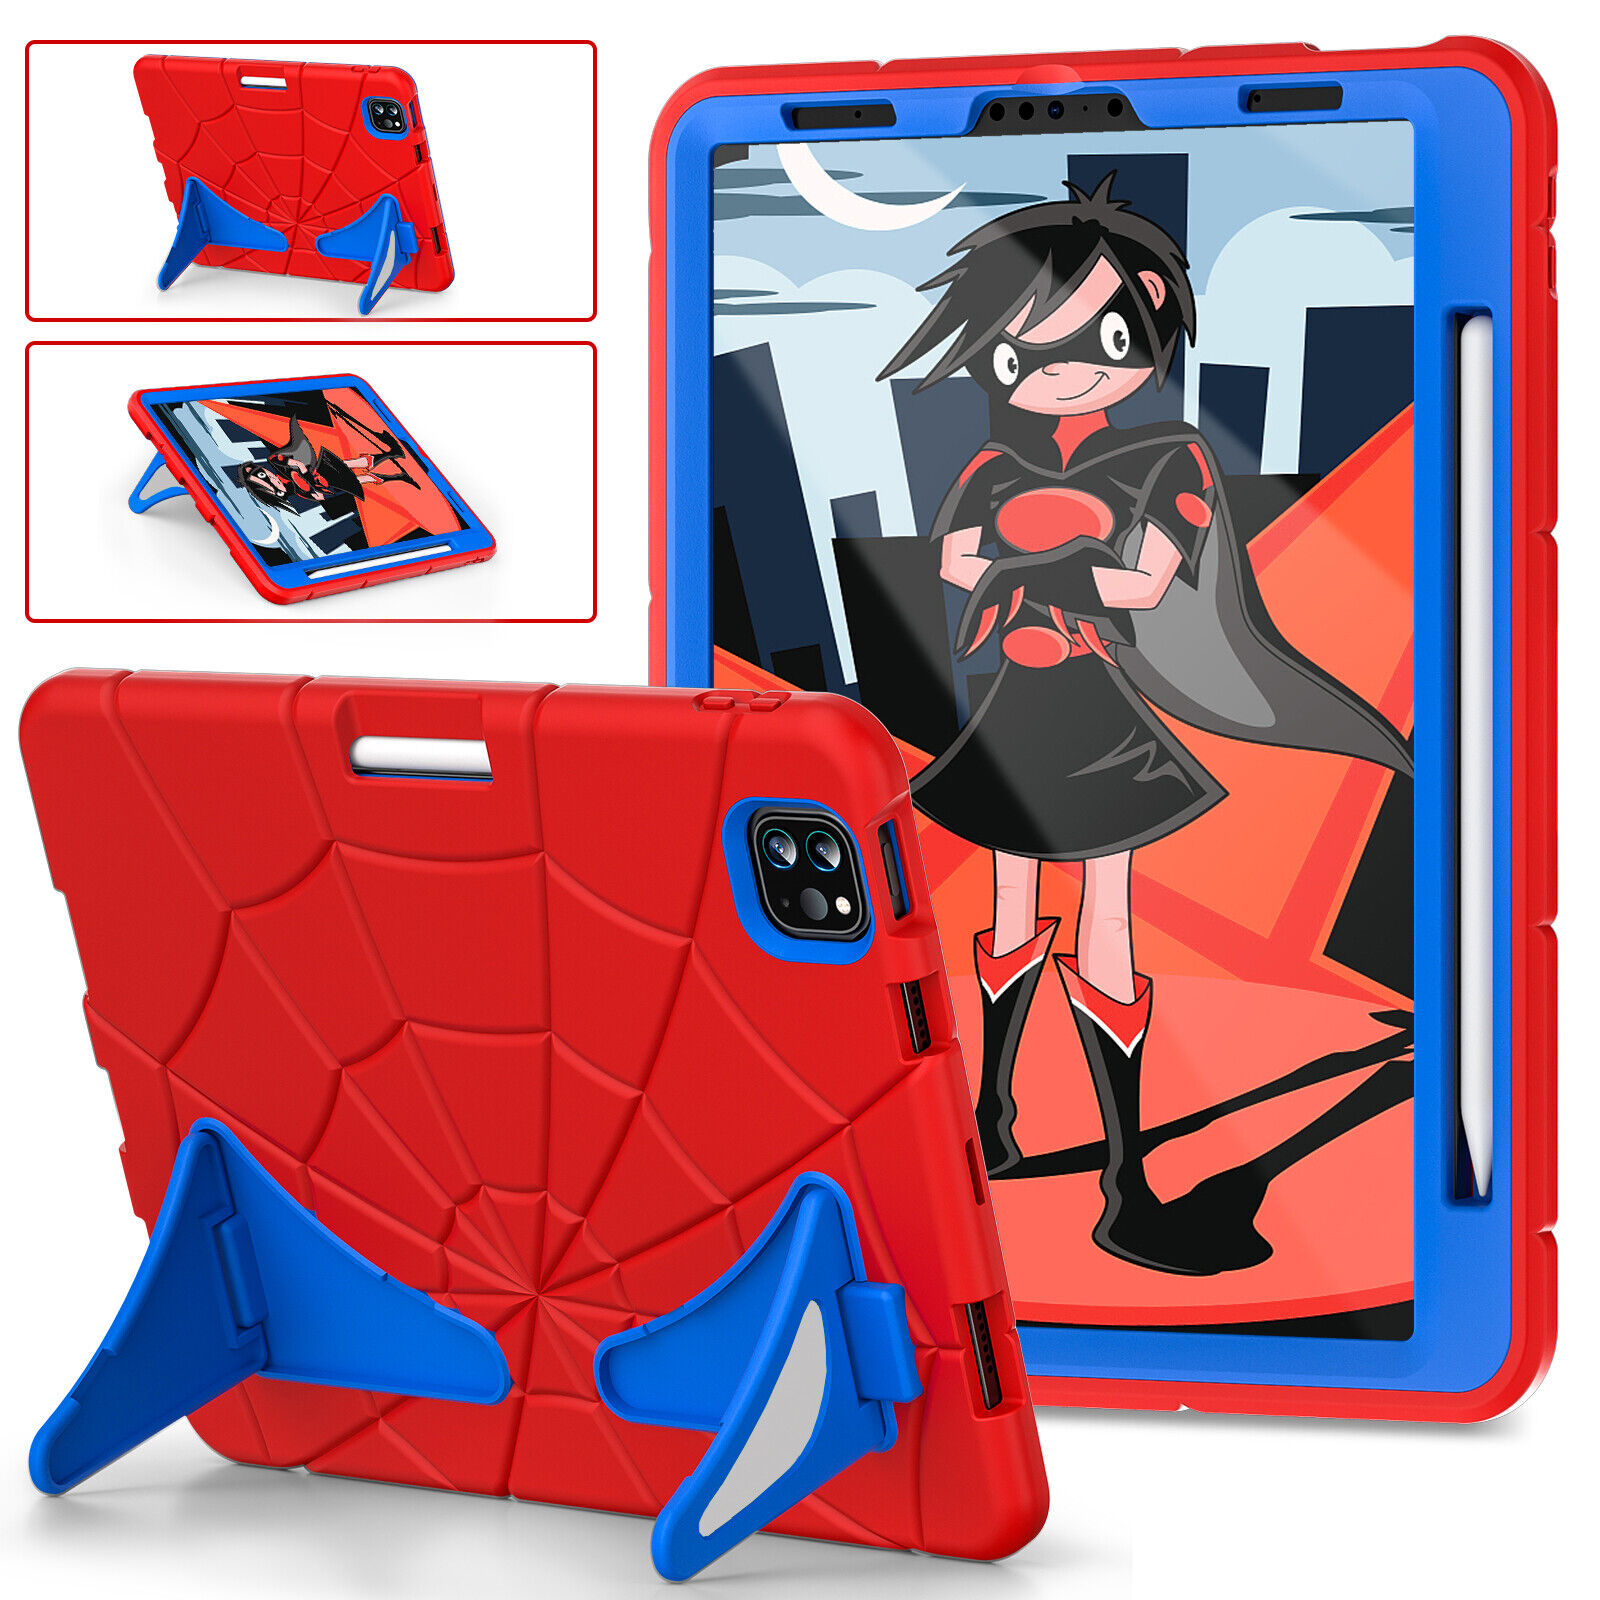 Kids Heavy Duty Shockproof Case Cover For iPad 7th 8th 9th 10th Generation Air 4